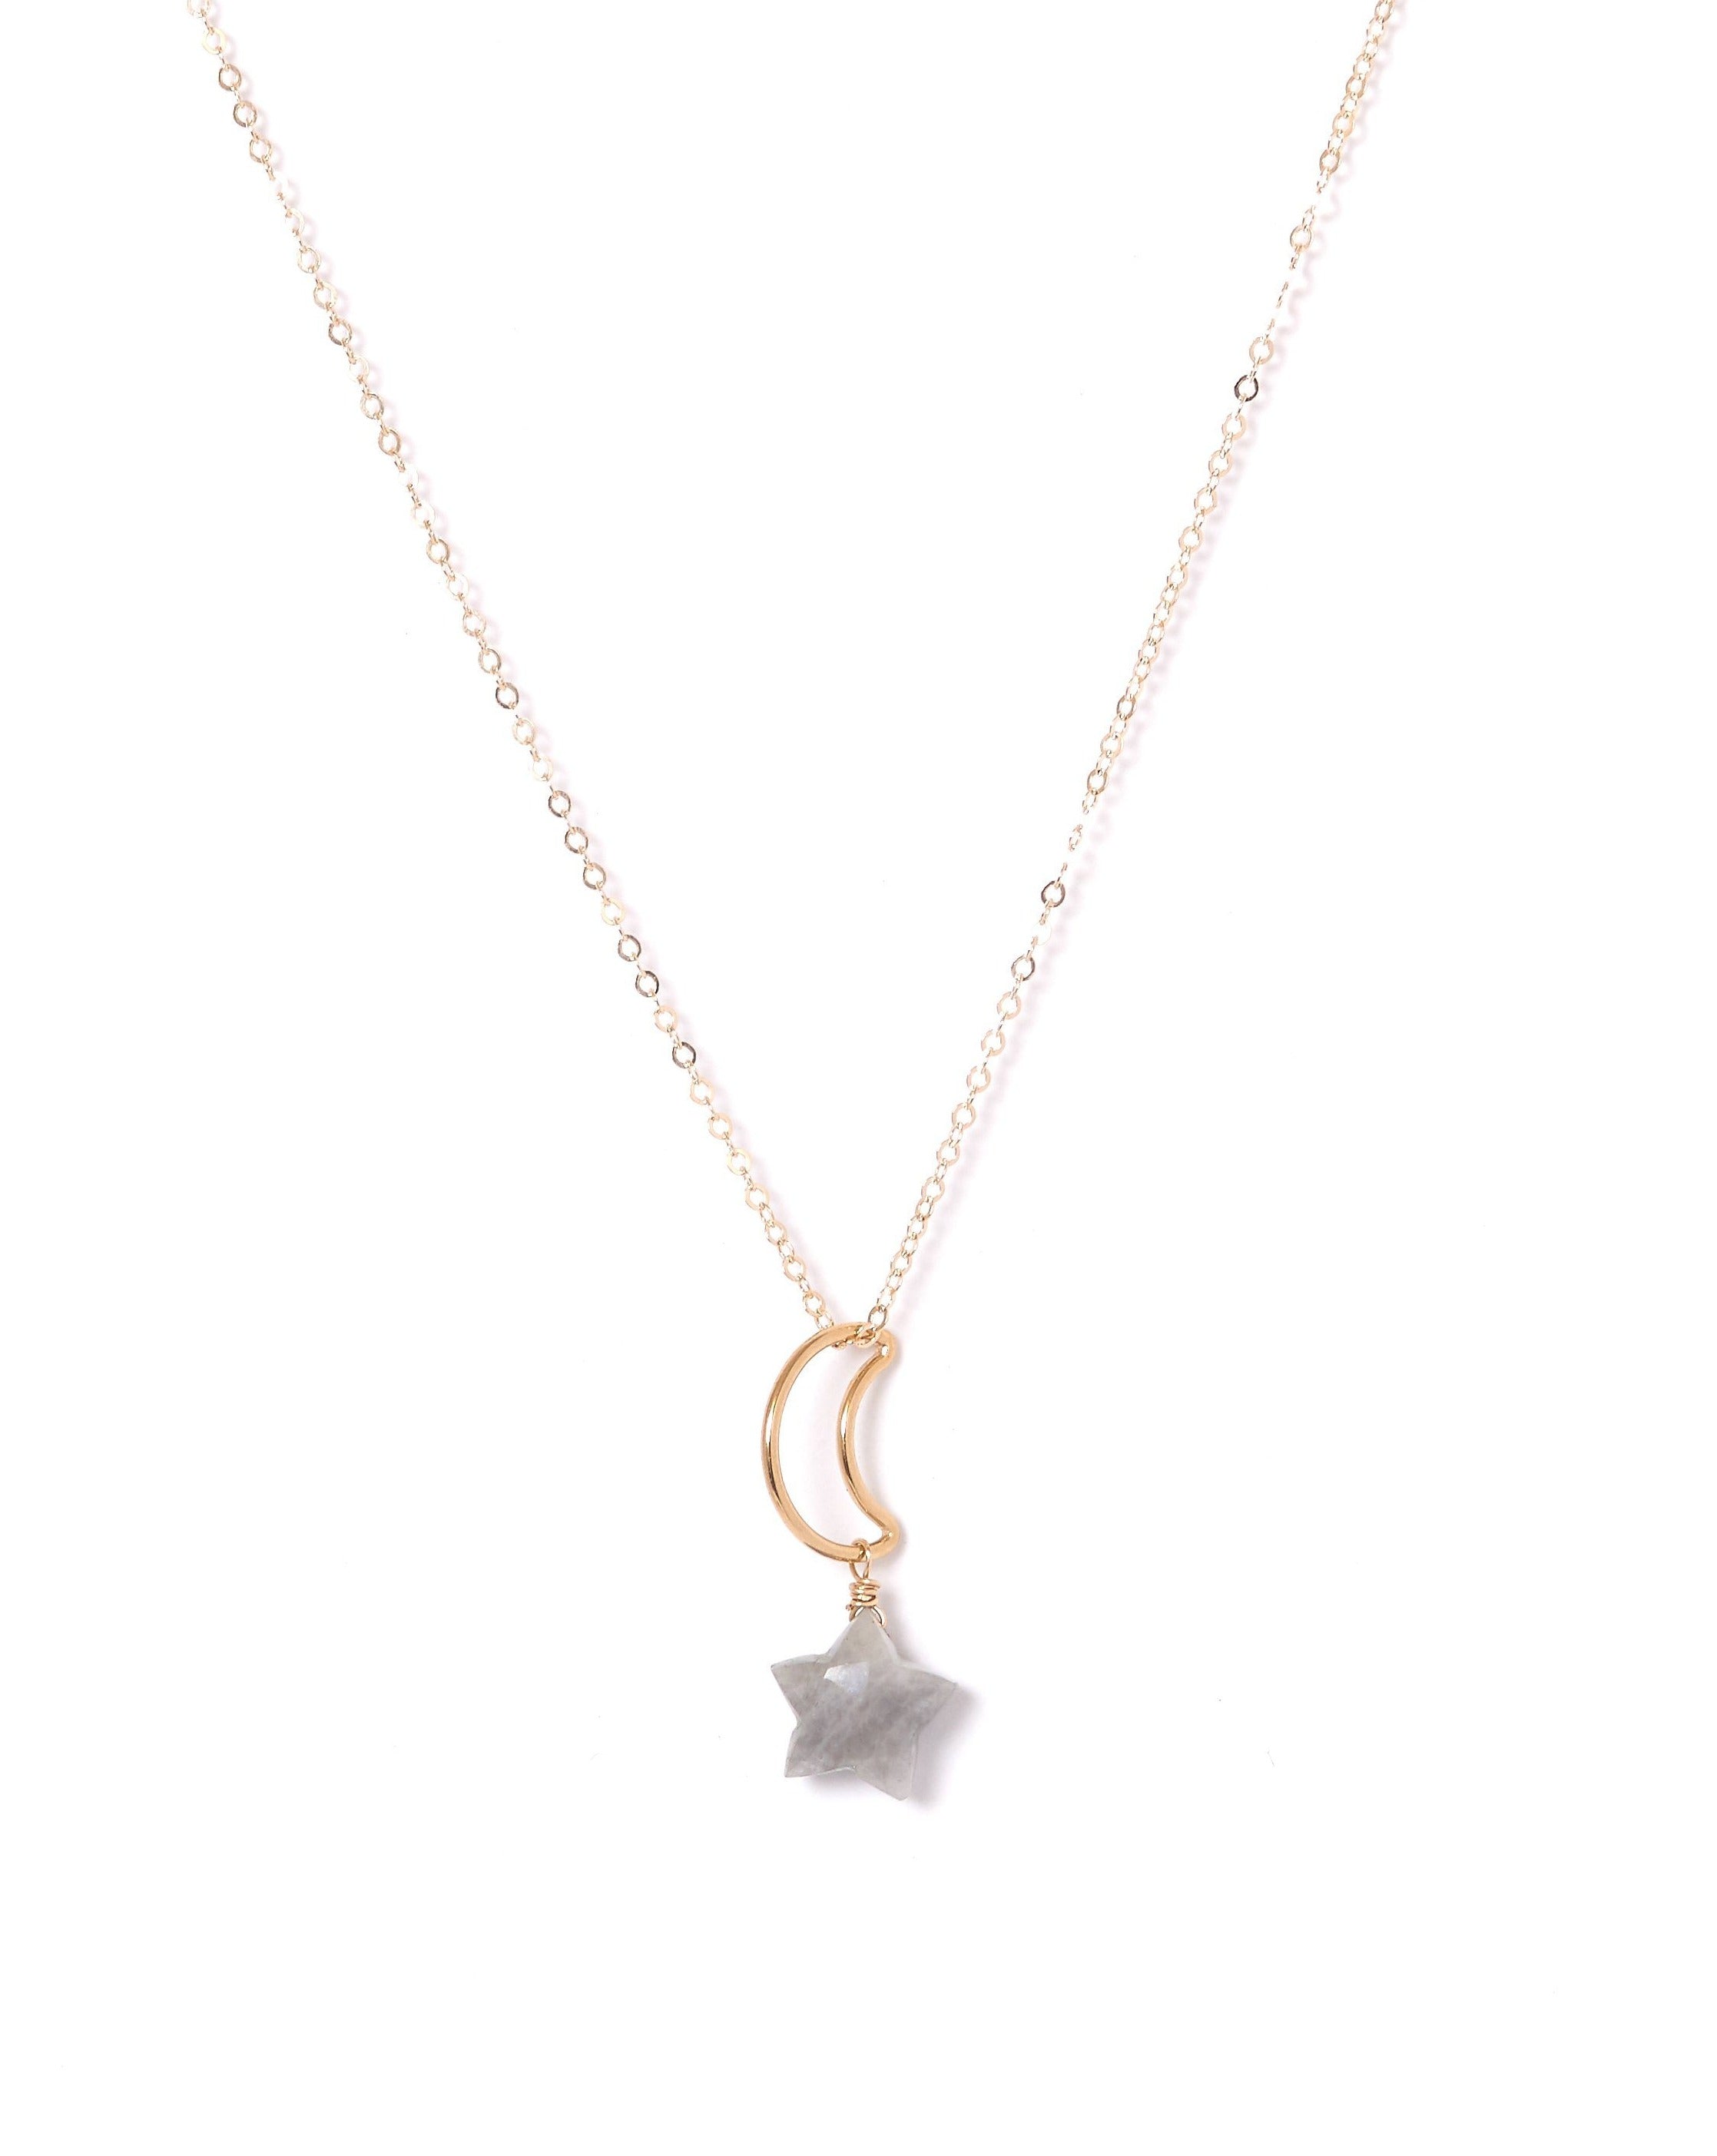 Lunastar Necklace by KOZAKH. A 16 to 18 inch adjustable length necklace, crafted in 14K Gold Filled, featuring a 13mm moon charm and a Grey Moonstone star charm.